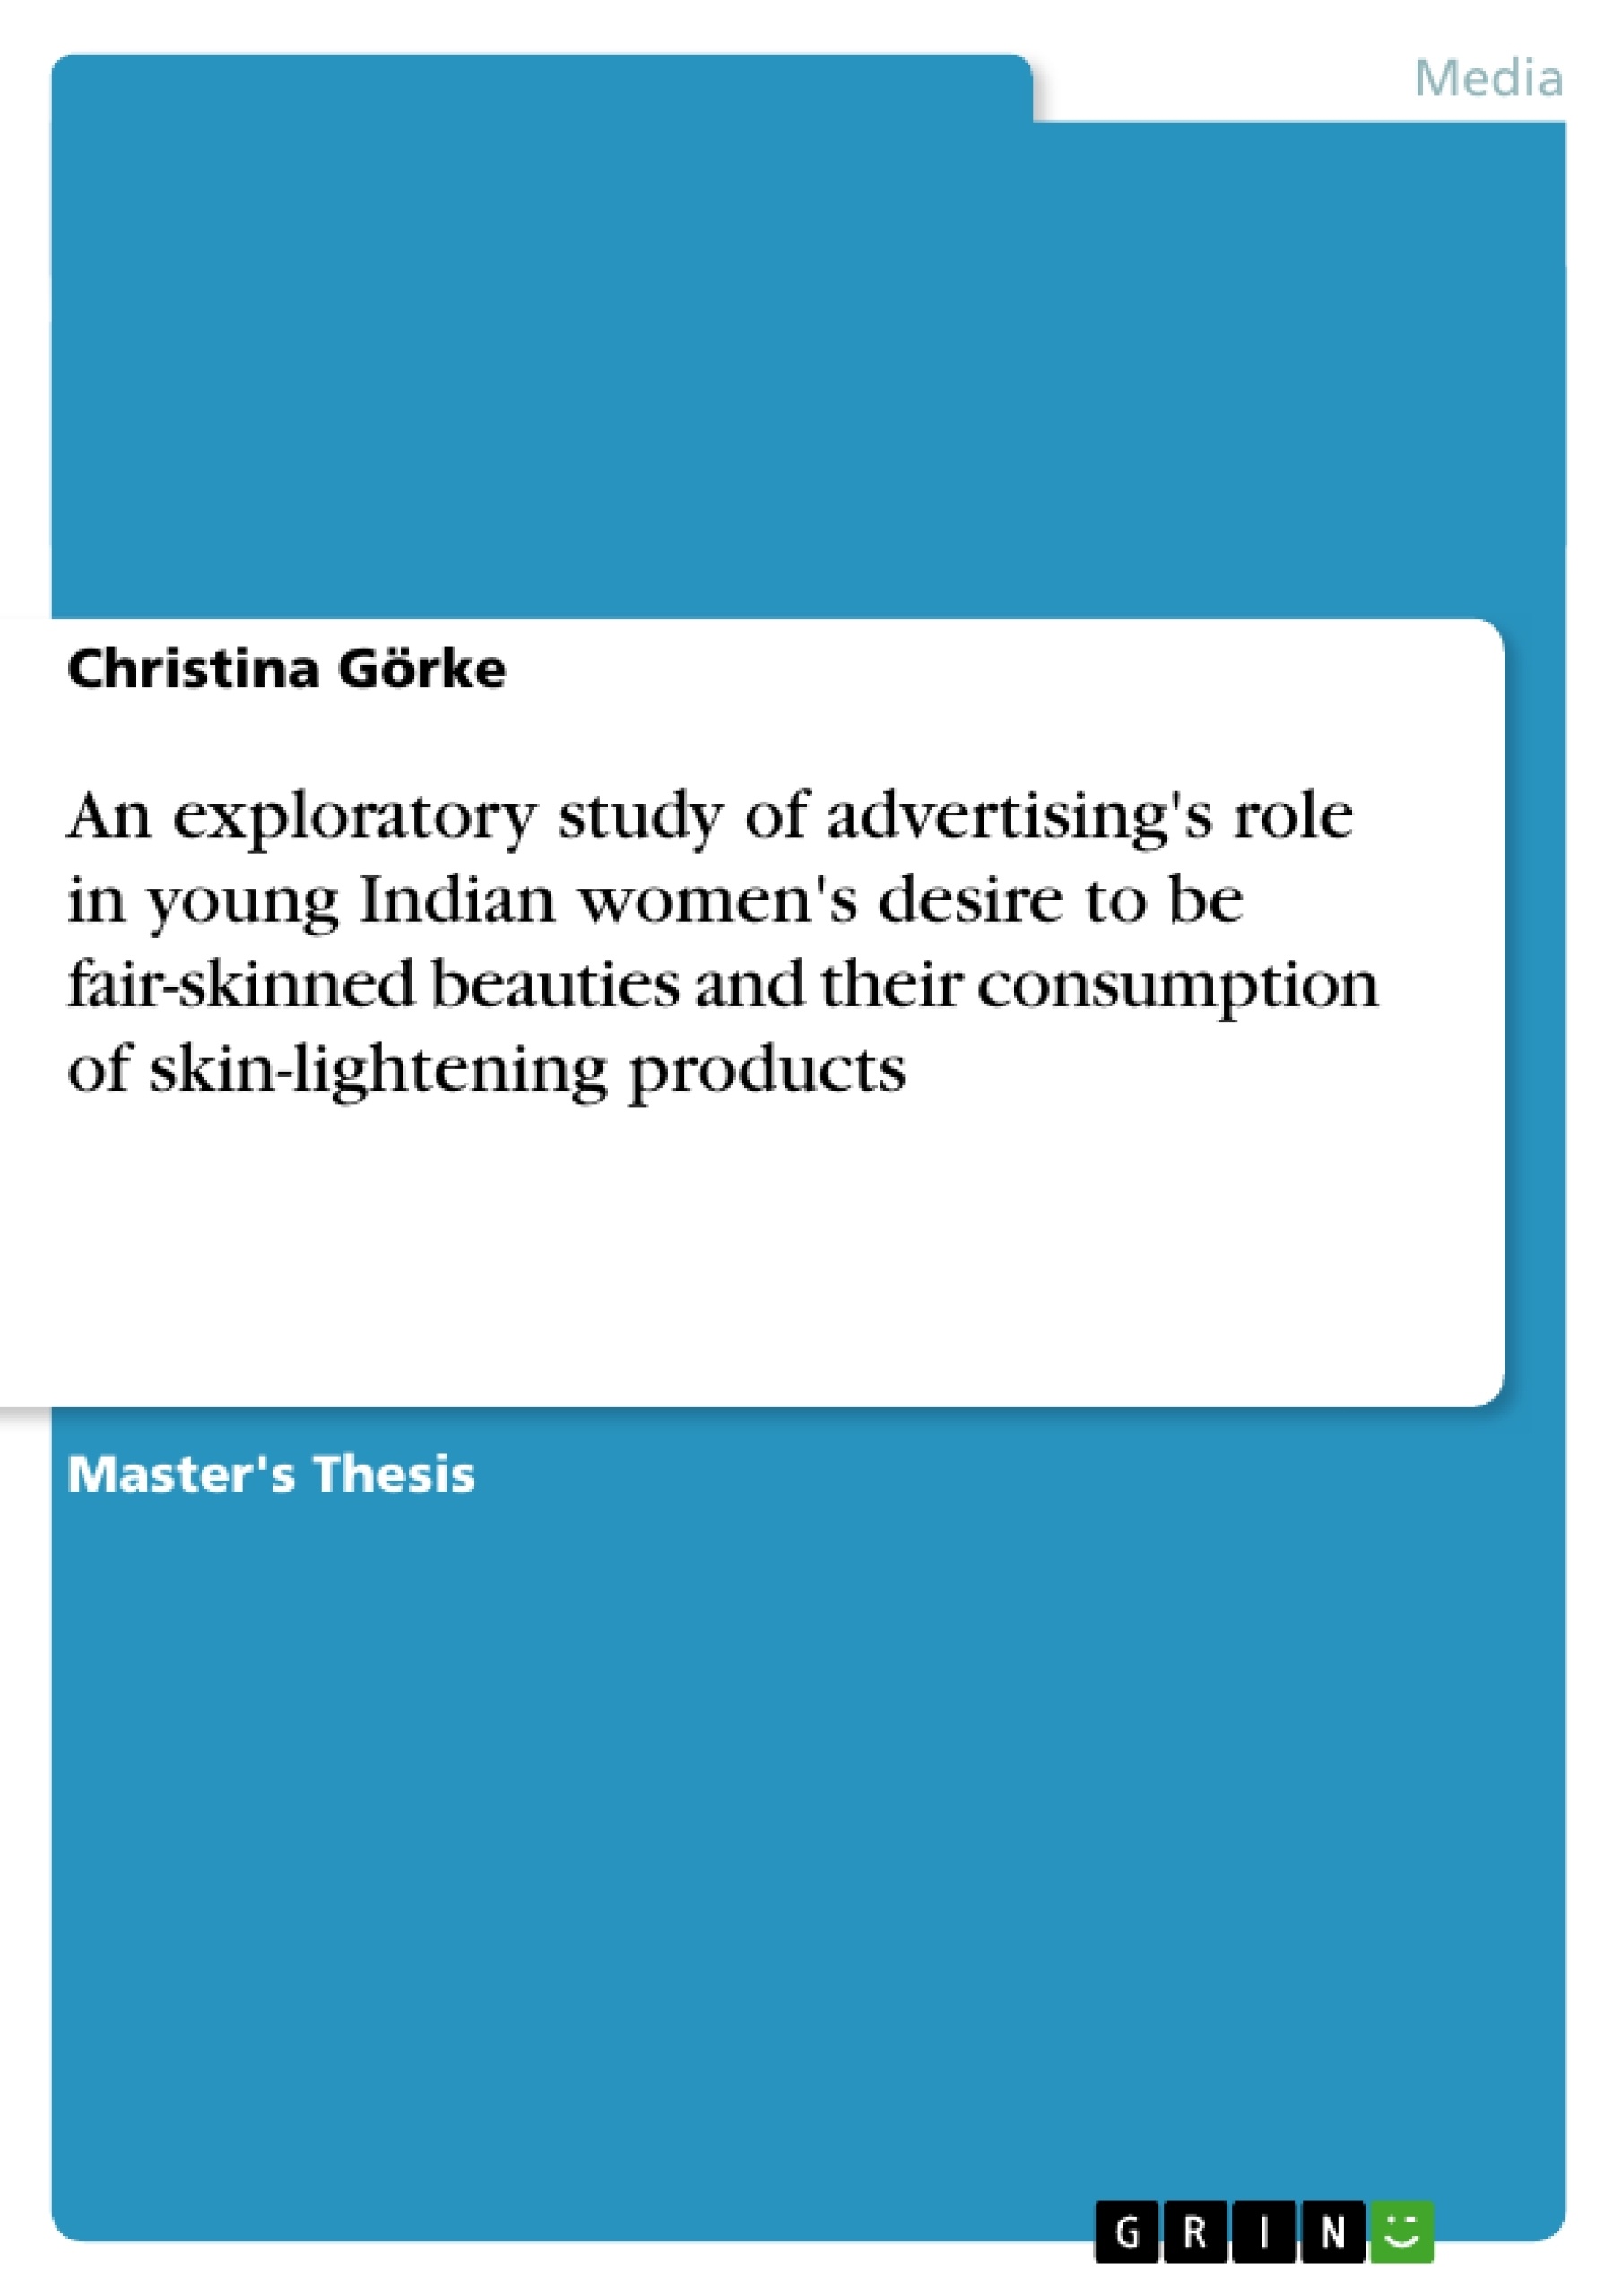 Titel: An exploratory study of advertising's role in young Indian women's desire to be fair-skinned beauties and their consumption of skin-lightening products